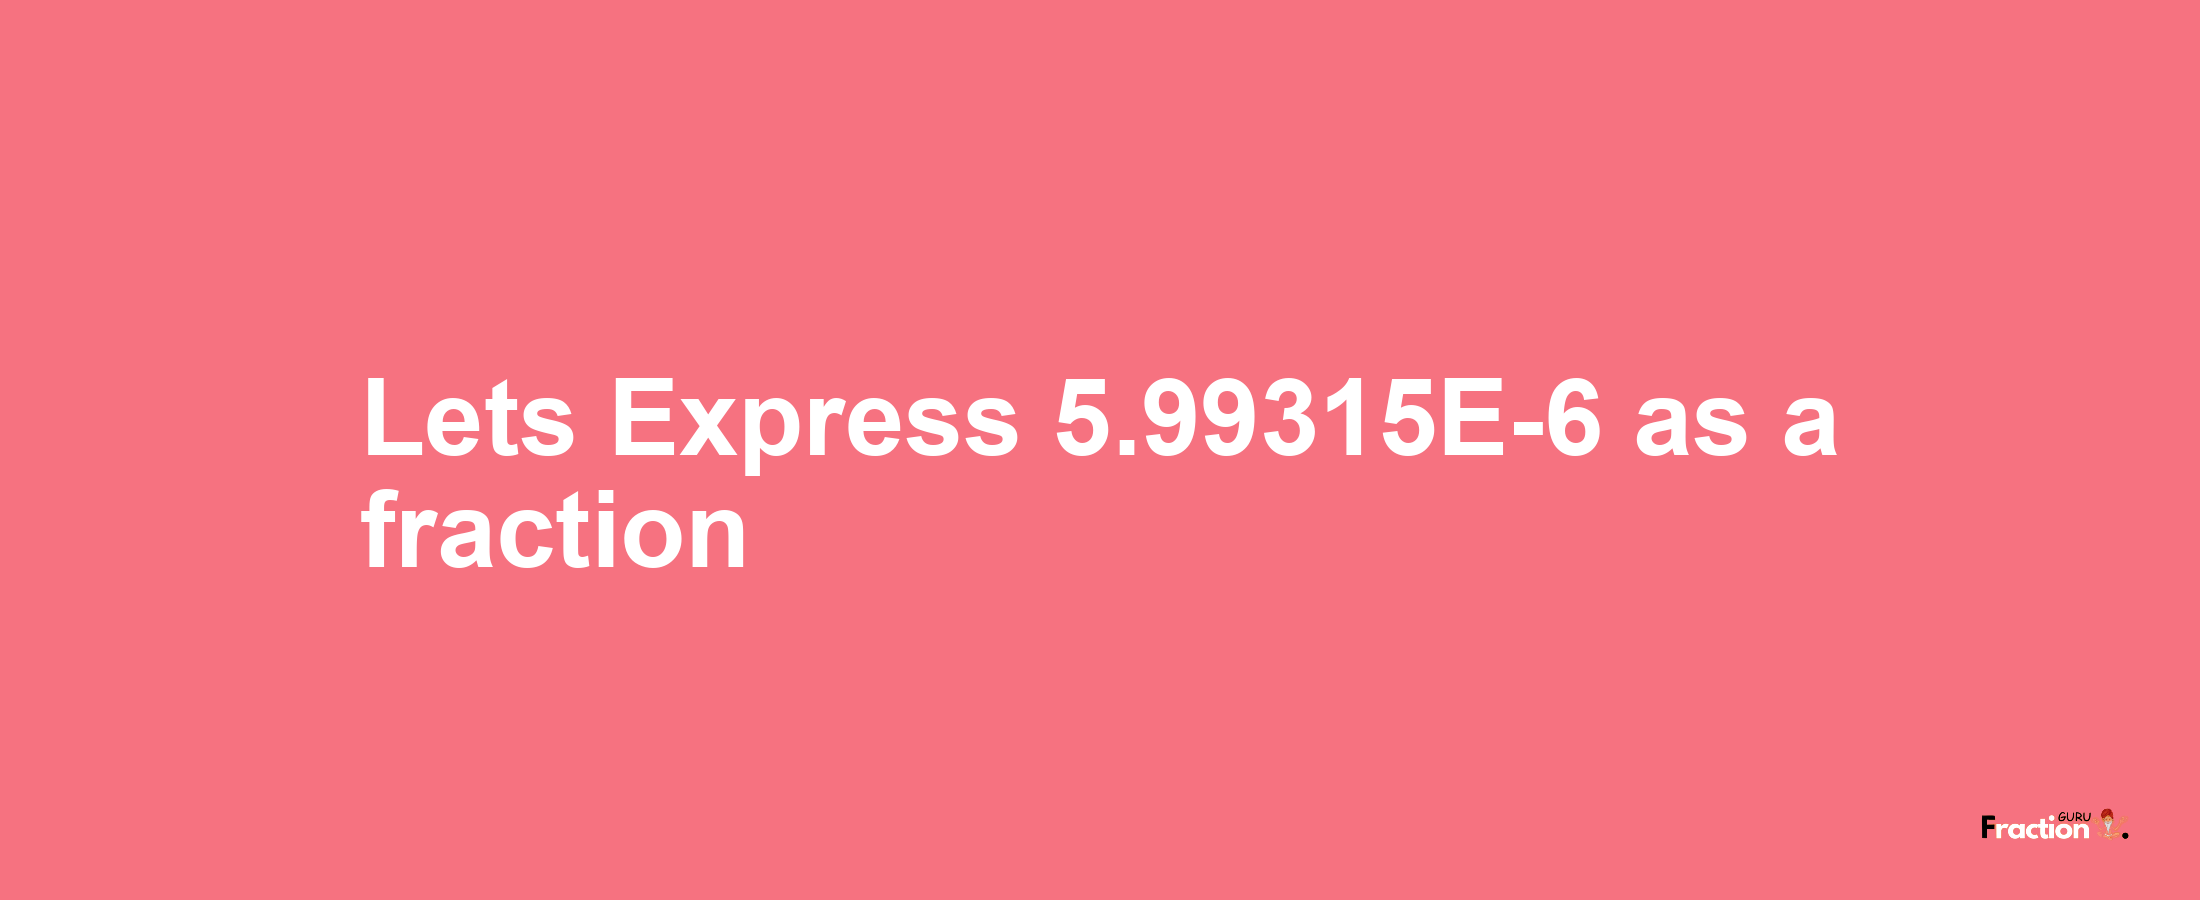 Lets Express 5.99315E-6 as afraction